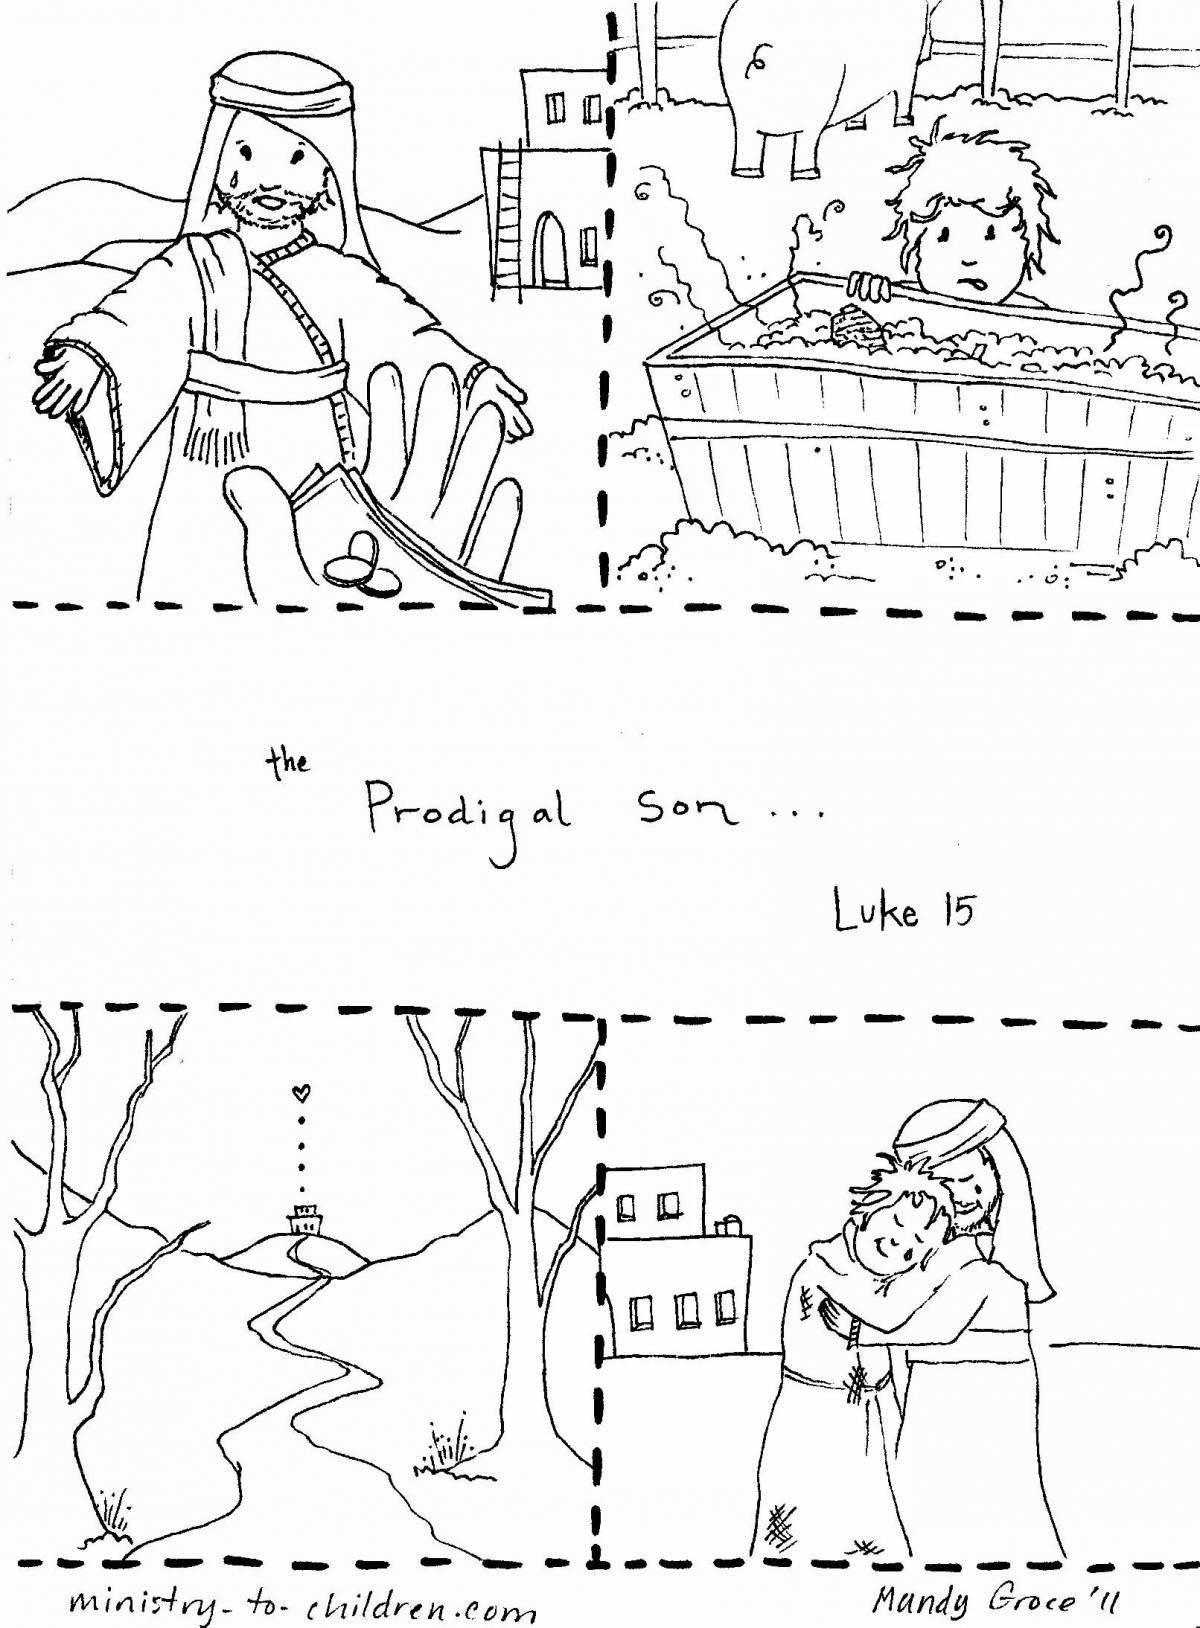 Prodigal Son's Magnificent Week coloring page